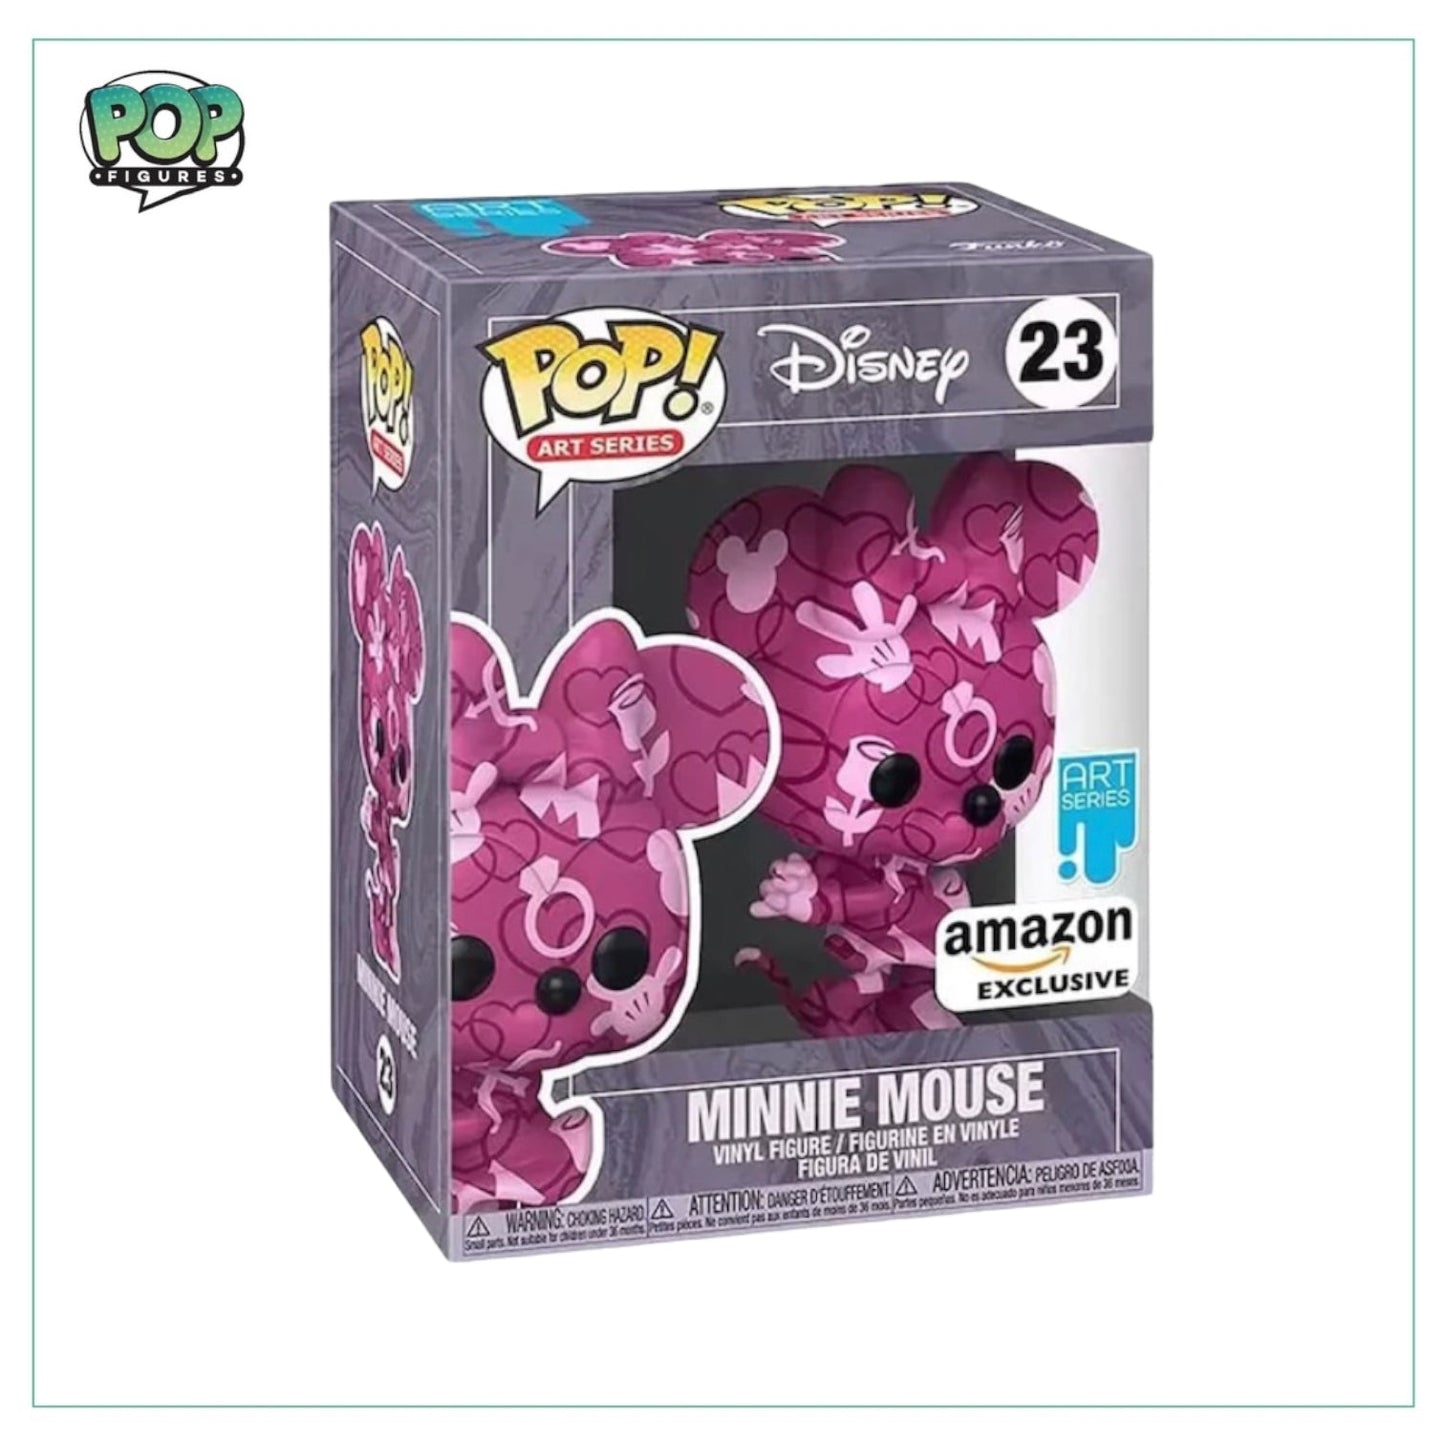 Minnie Mouse (Art Series) #23 Funko Pop! - Disney - Amazon Exclusive - Angry Cat